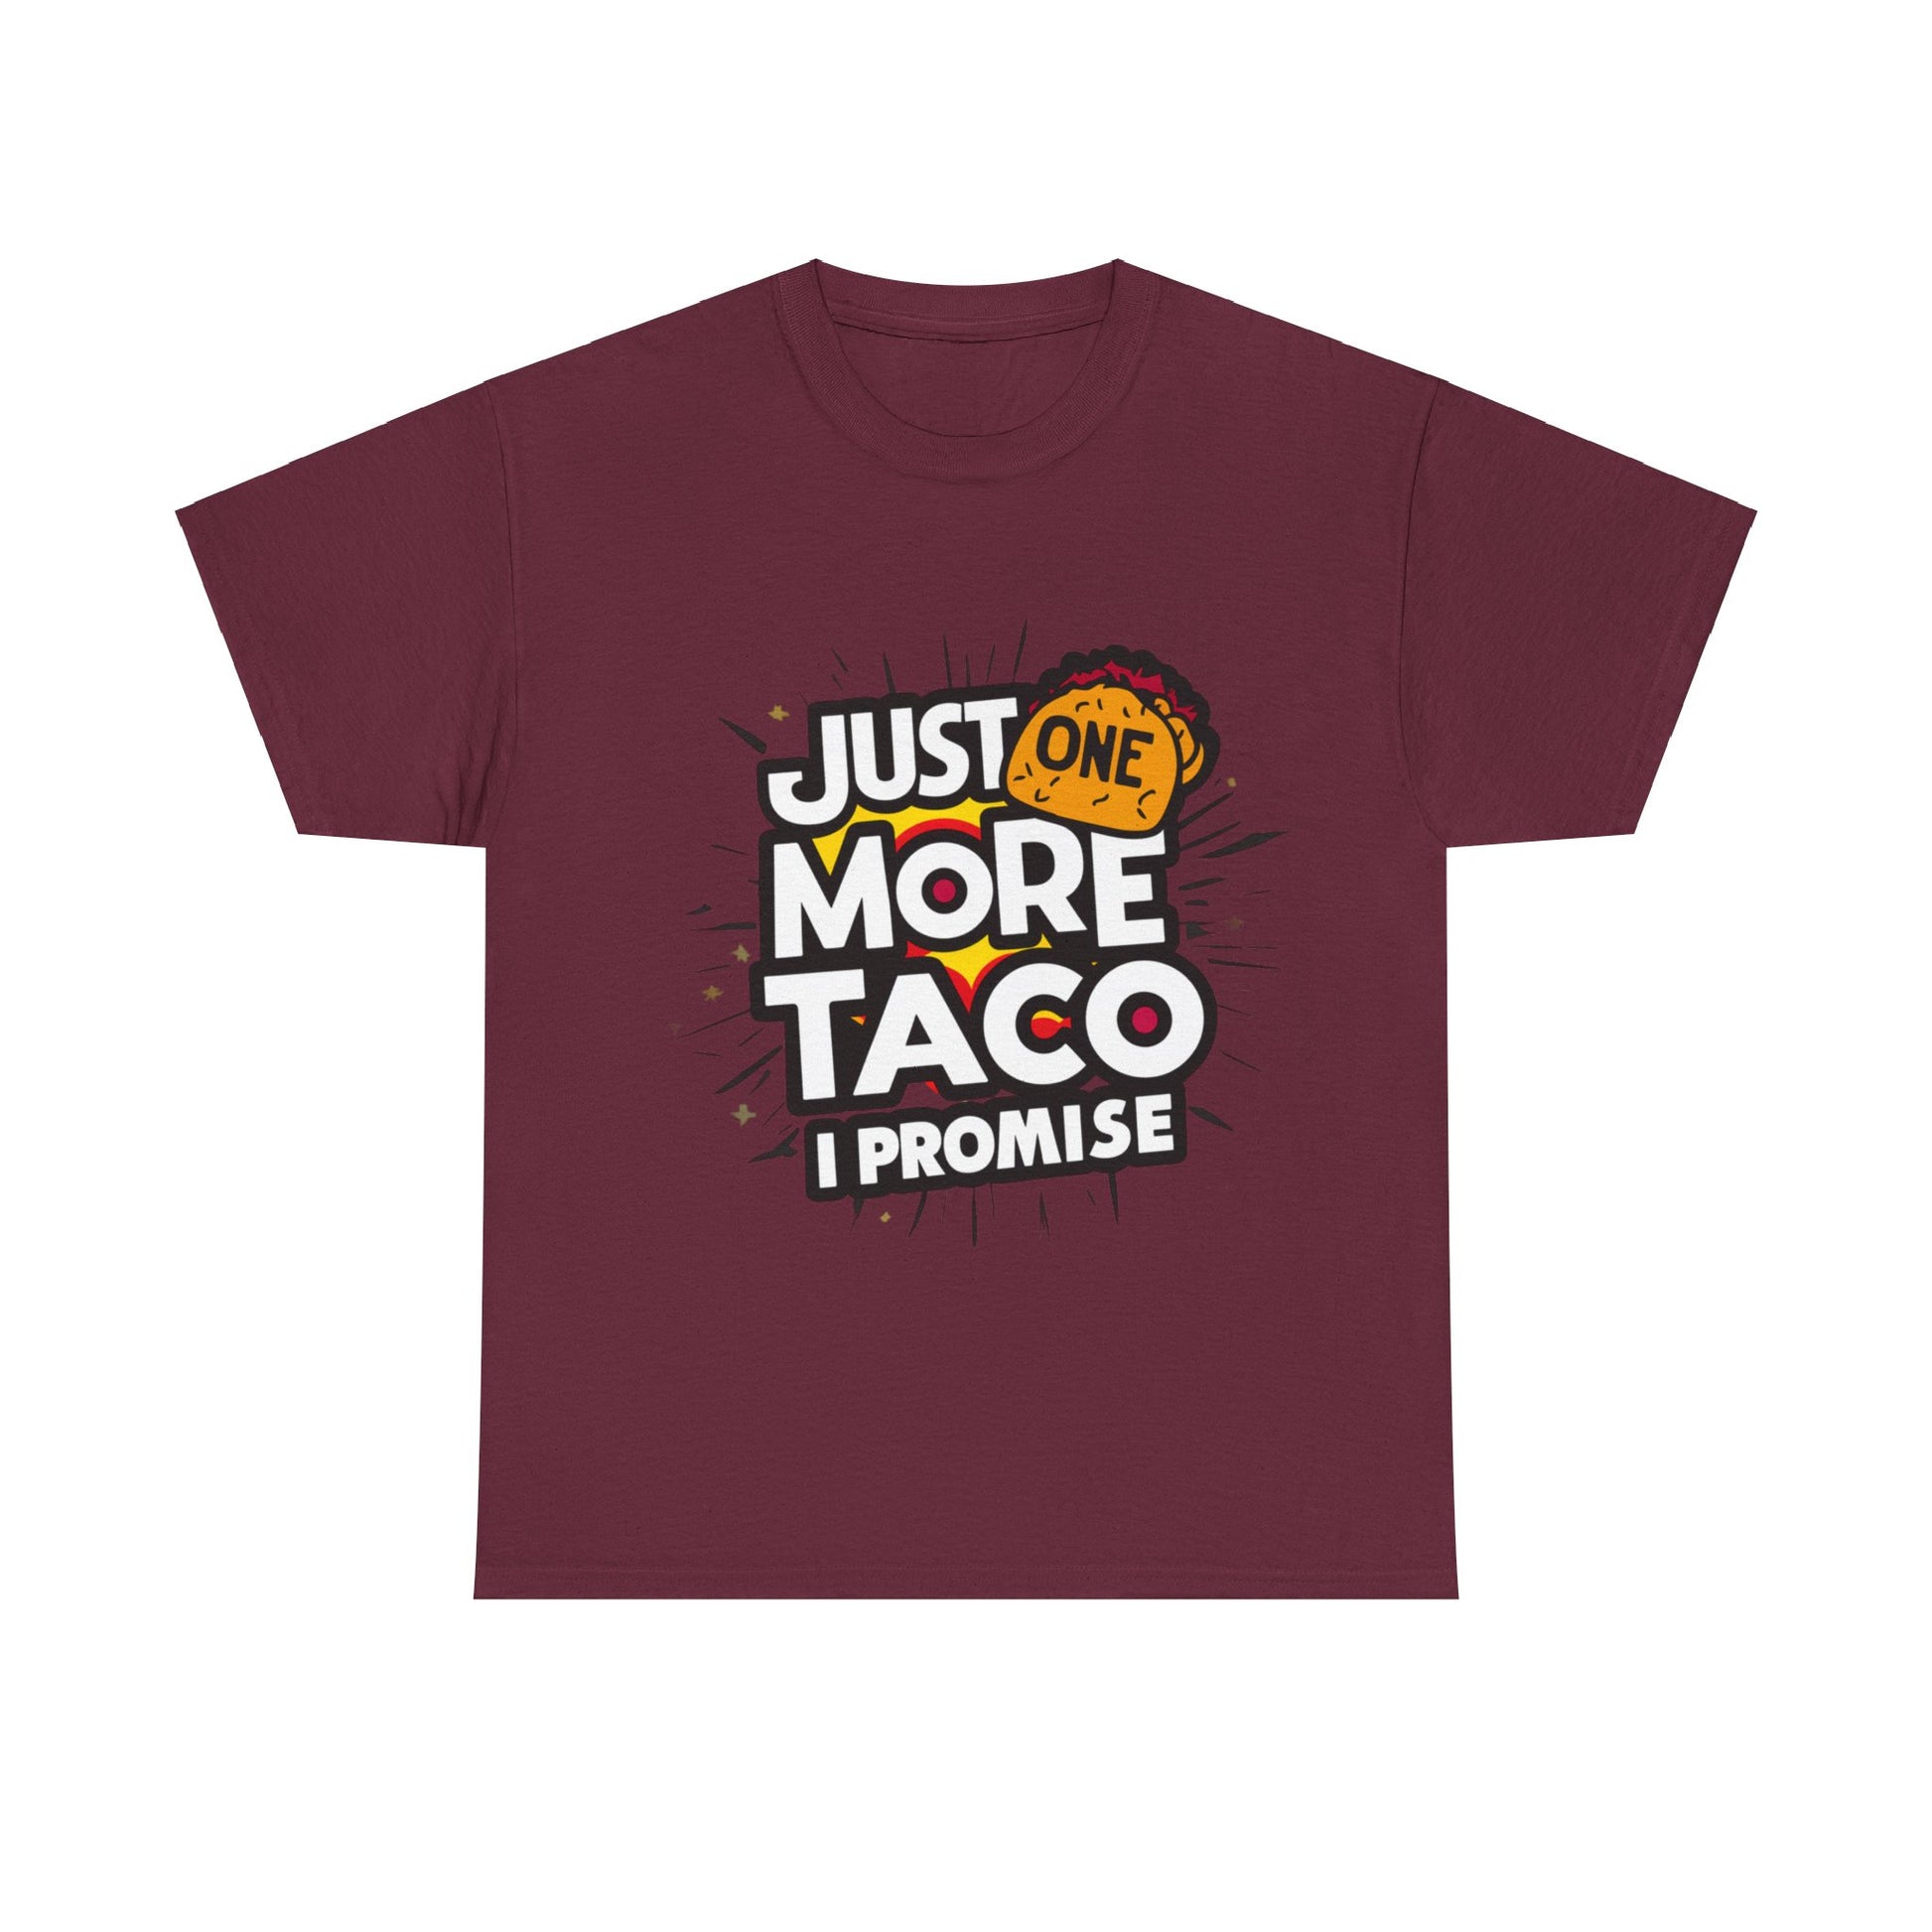 Copy of Just One More Taco I Promise Mexican Food Graphic Unisex Heavy Cotton Tee Cotton Funny Humorous Graphic Soft Premium Unisex Men Women Maroon T-shirt Birthday Gift-5